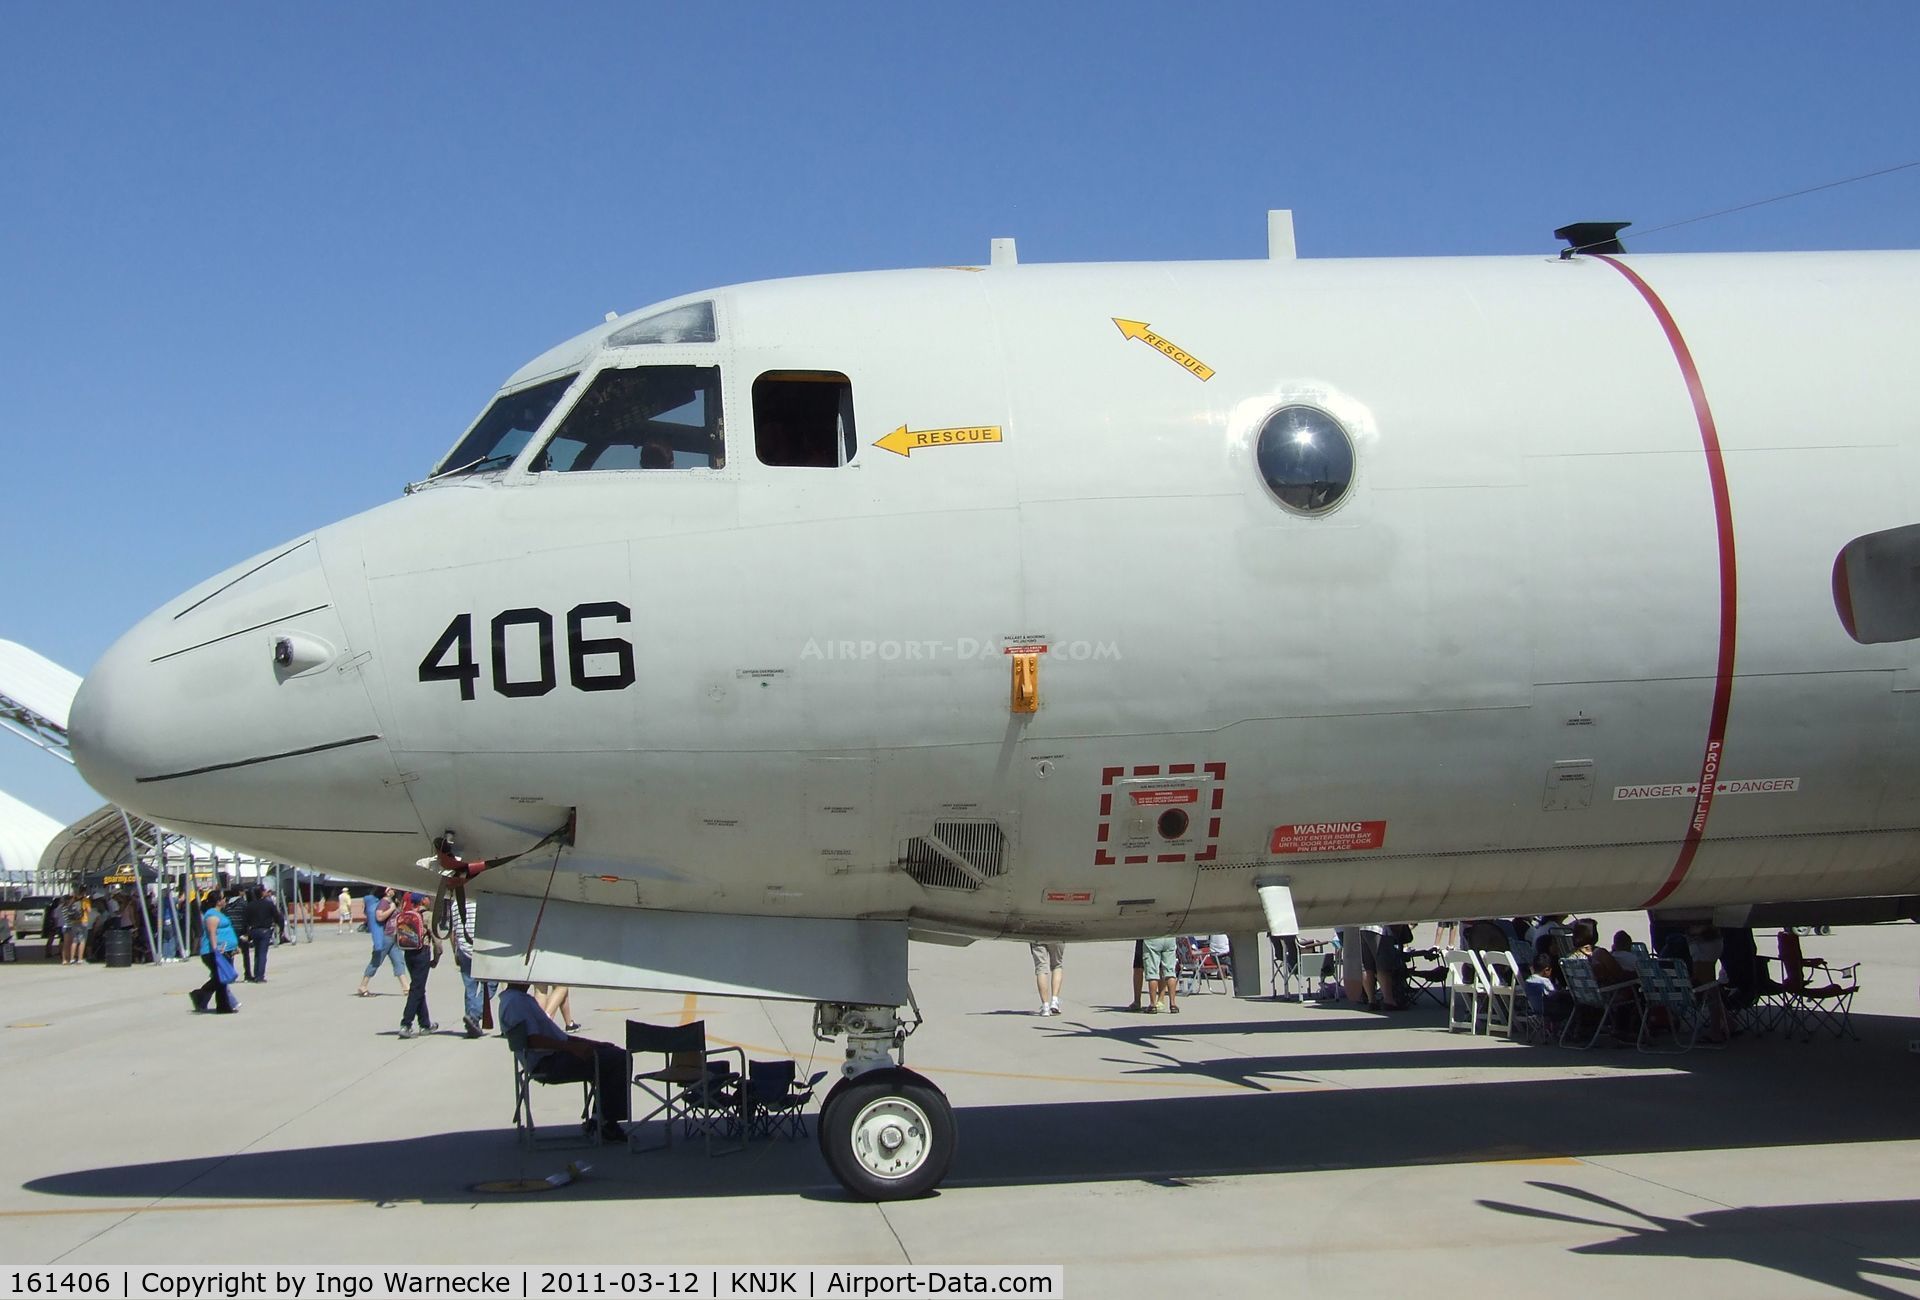 161406, Lockheed P-3C Orion C/N 285A-5743, Lockheed P-3C Orion of the US Navy  at the 2011 airshow at El Centro NAS, CA